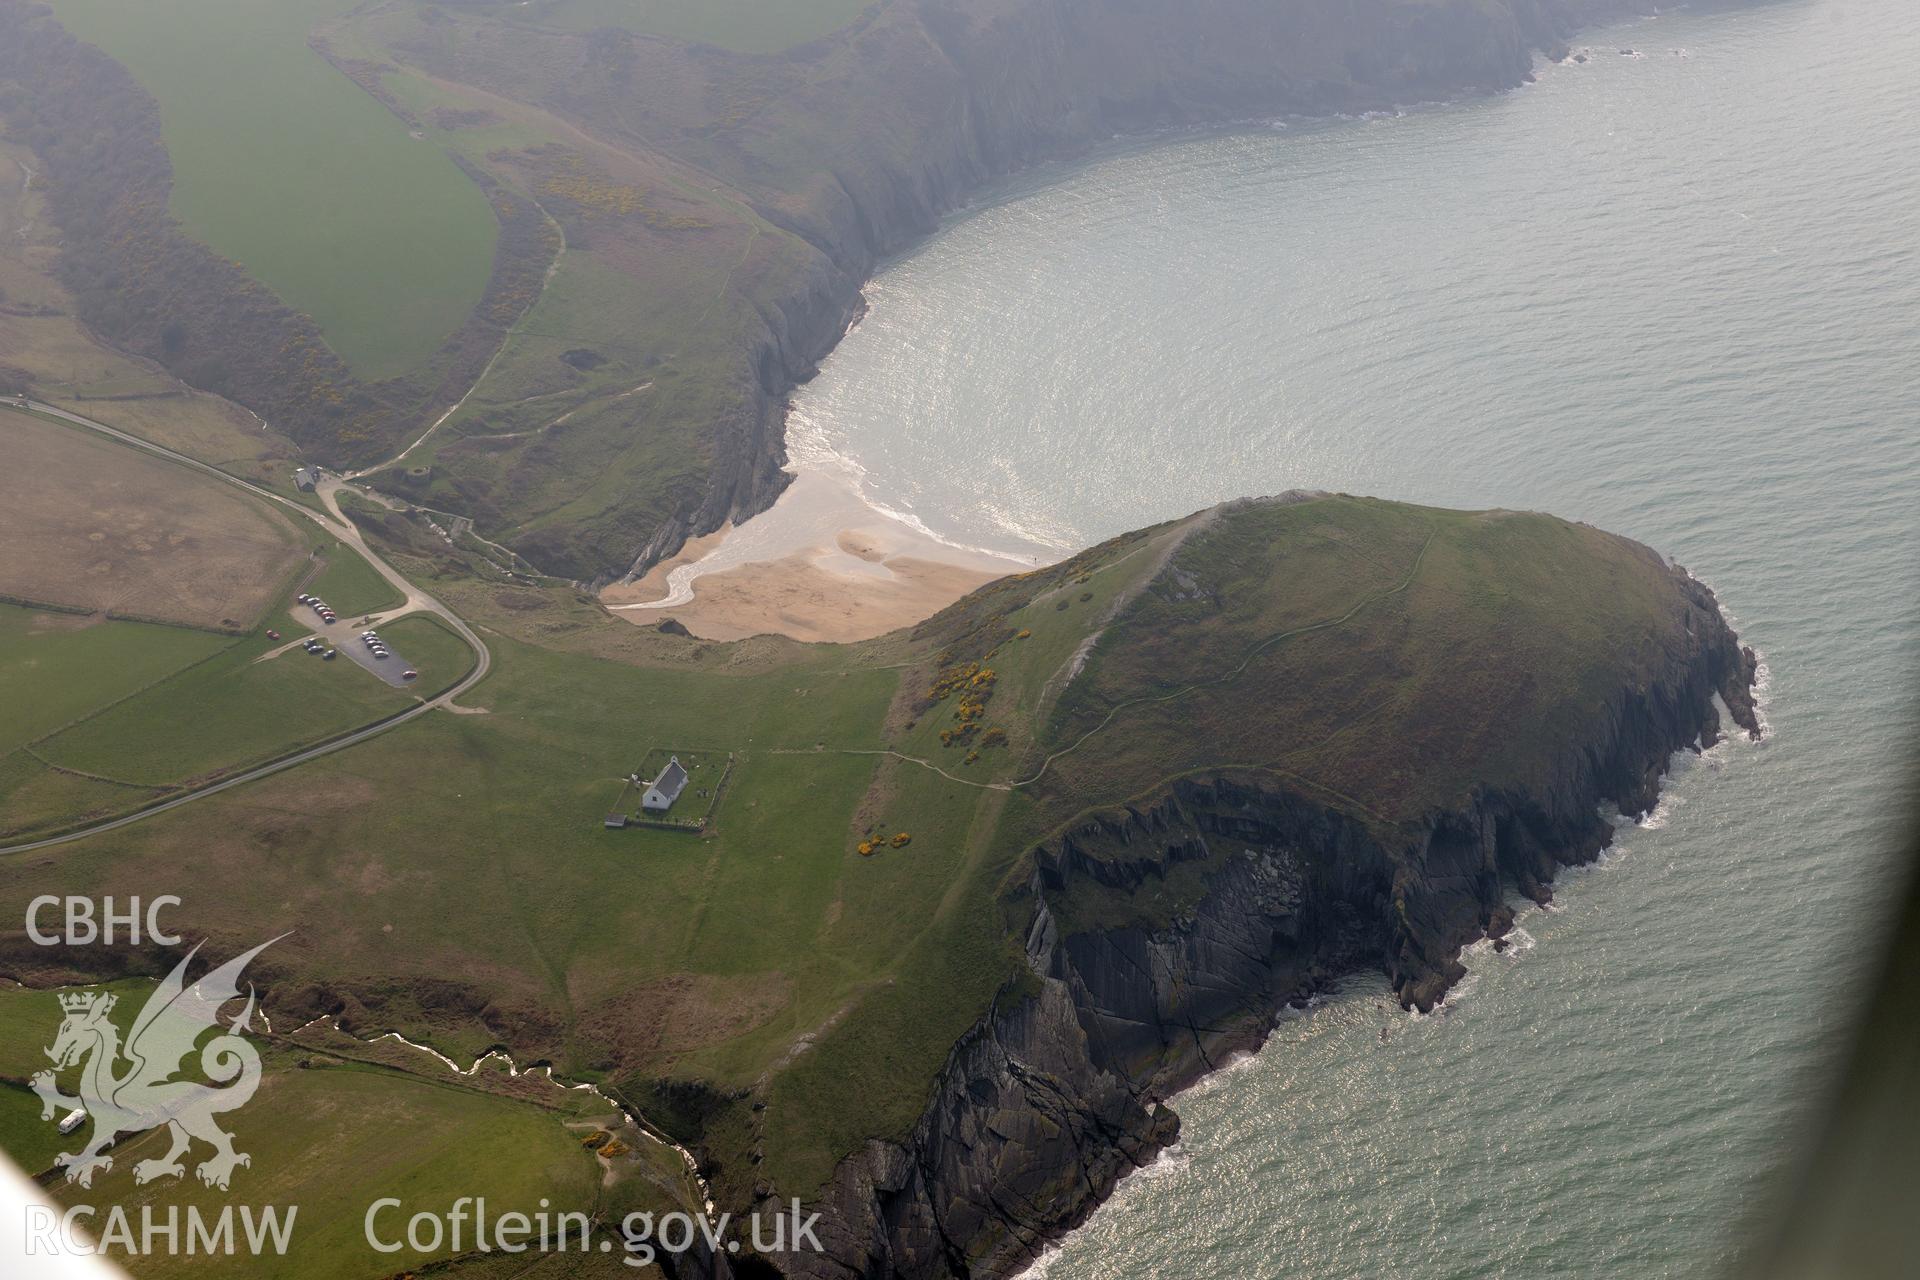 Royal Commission aerial photograph of Mwnt taken on 27th March 2017. Baseline aerial reconnaissance survey for the CHERISH Project. ? Crown: CHERISH PROJECT 2017. Produced with EU funds through the Ireland Wales Co-operation Programme 2014-2020. All material made freely available through the Open Government Licence.